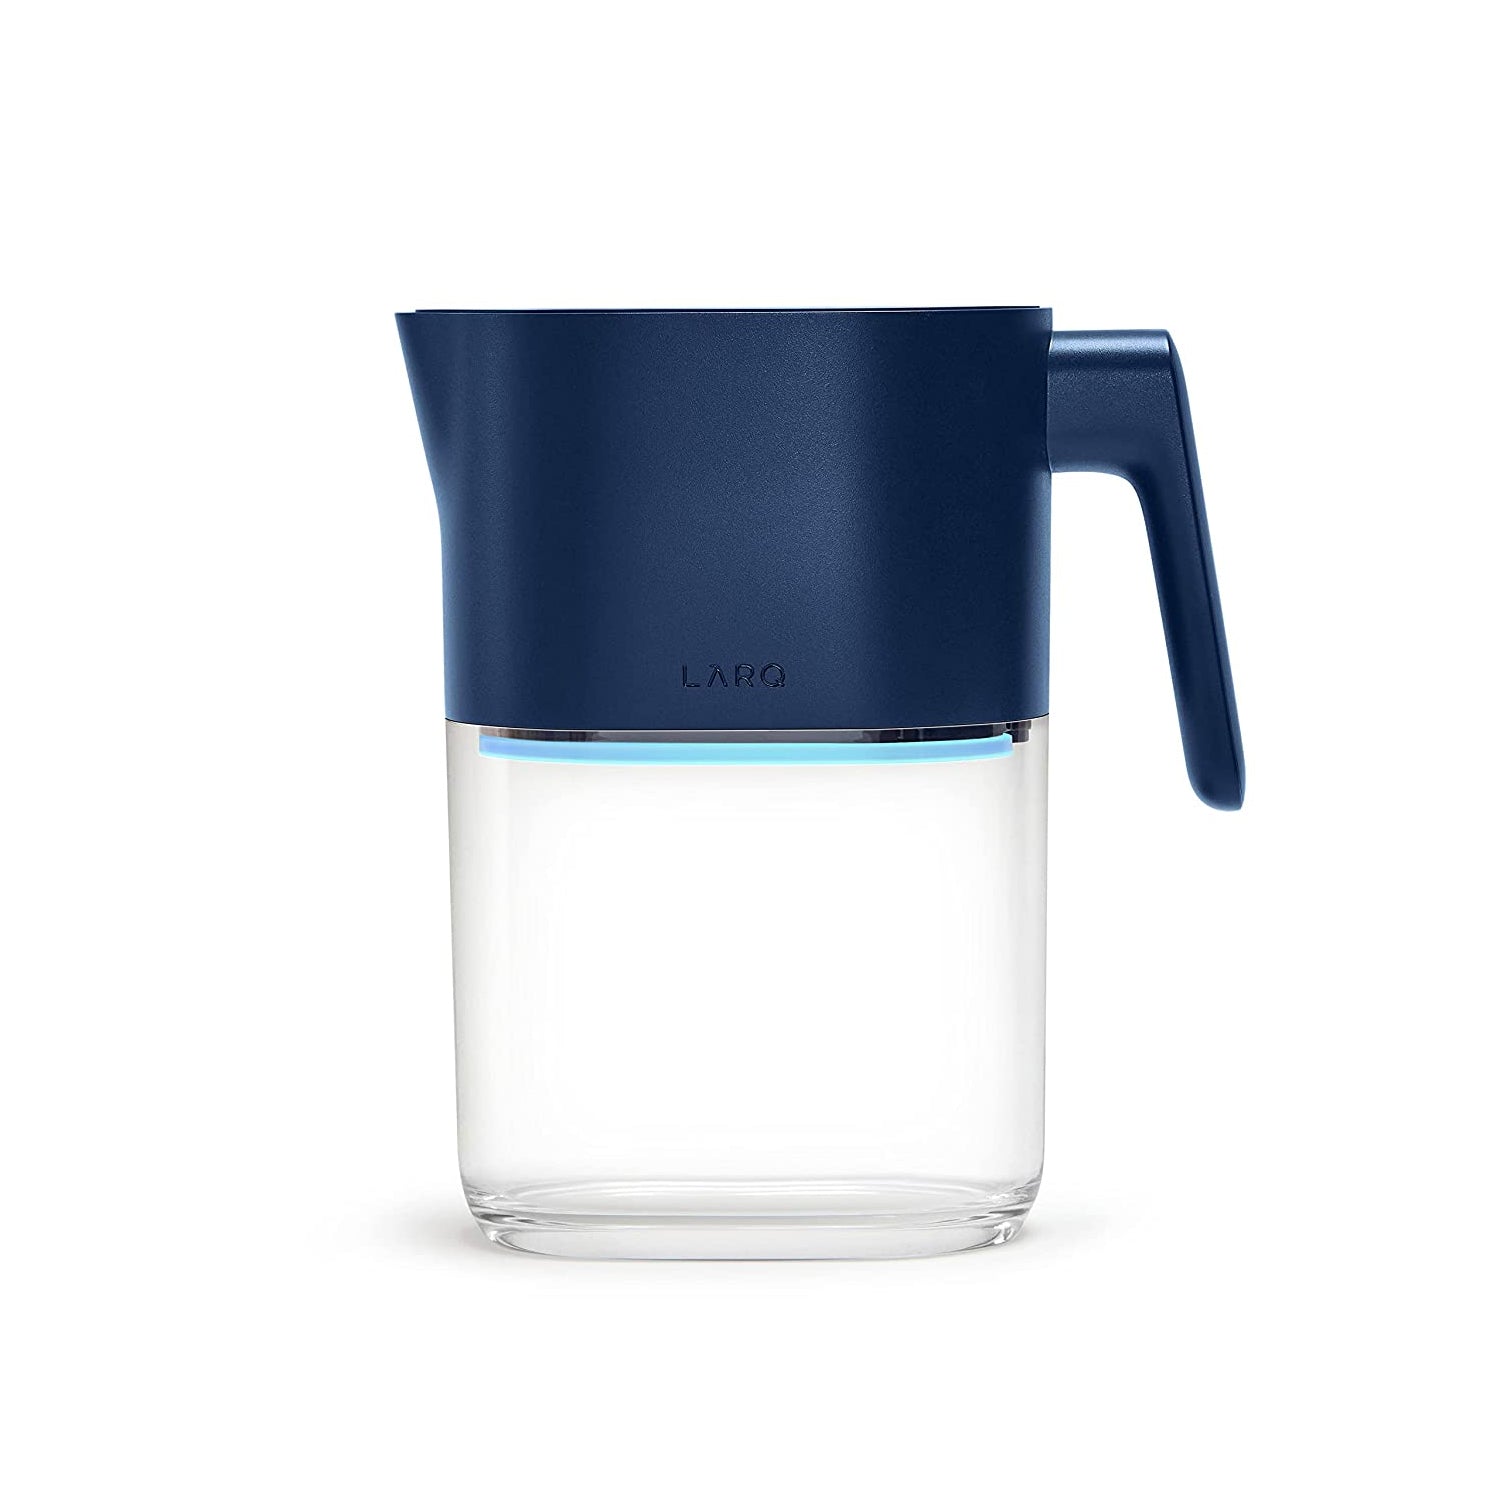 LARQ Pitcher PureVis with Nano Zero Filter Technology 1.9L / 8-Cup